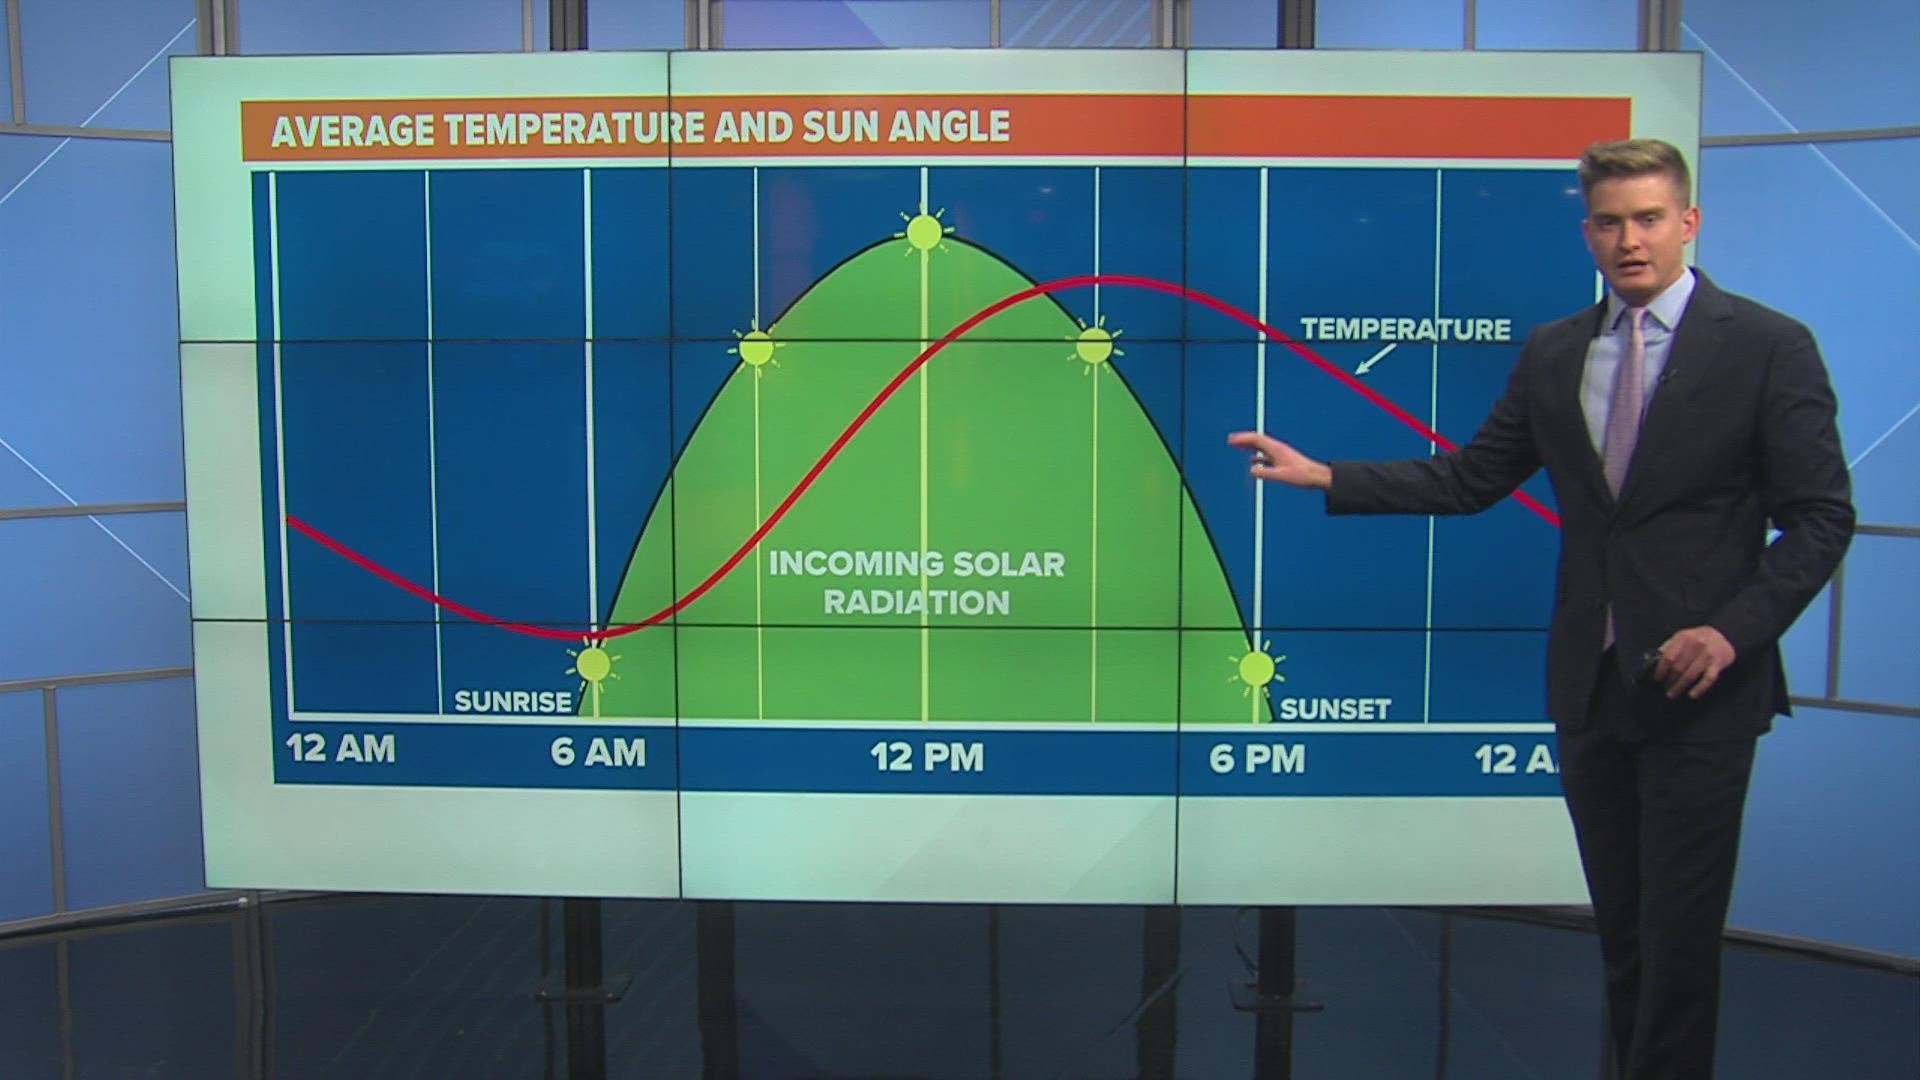 Why does the surface low temperature occur after sunrise? The answer may surprise you!